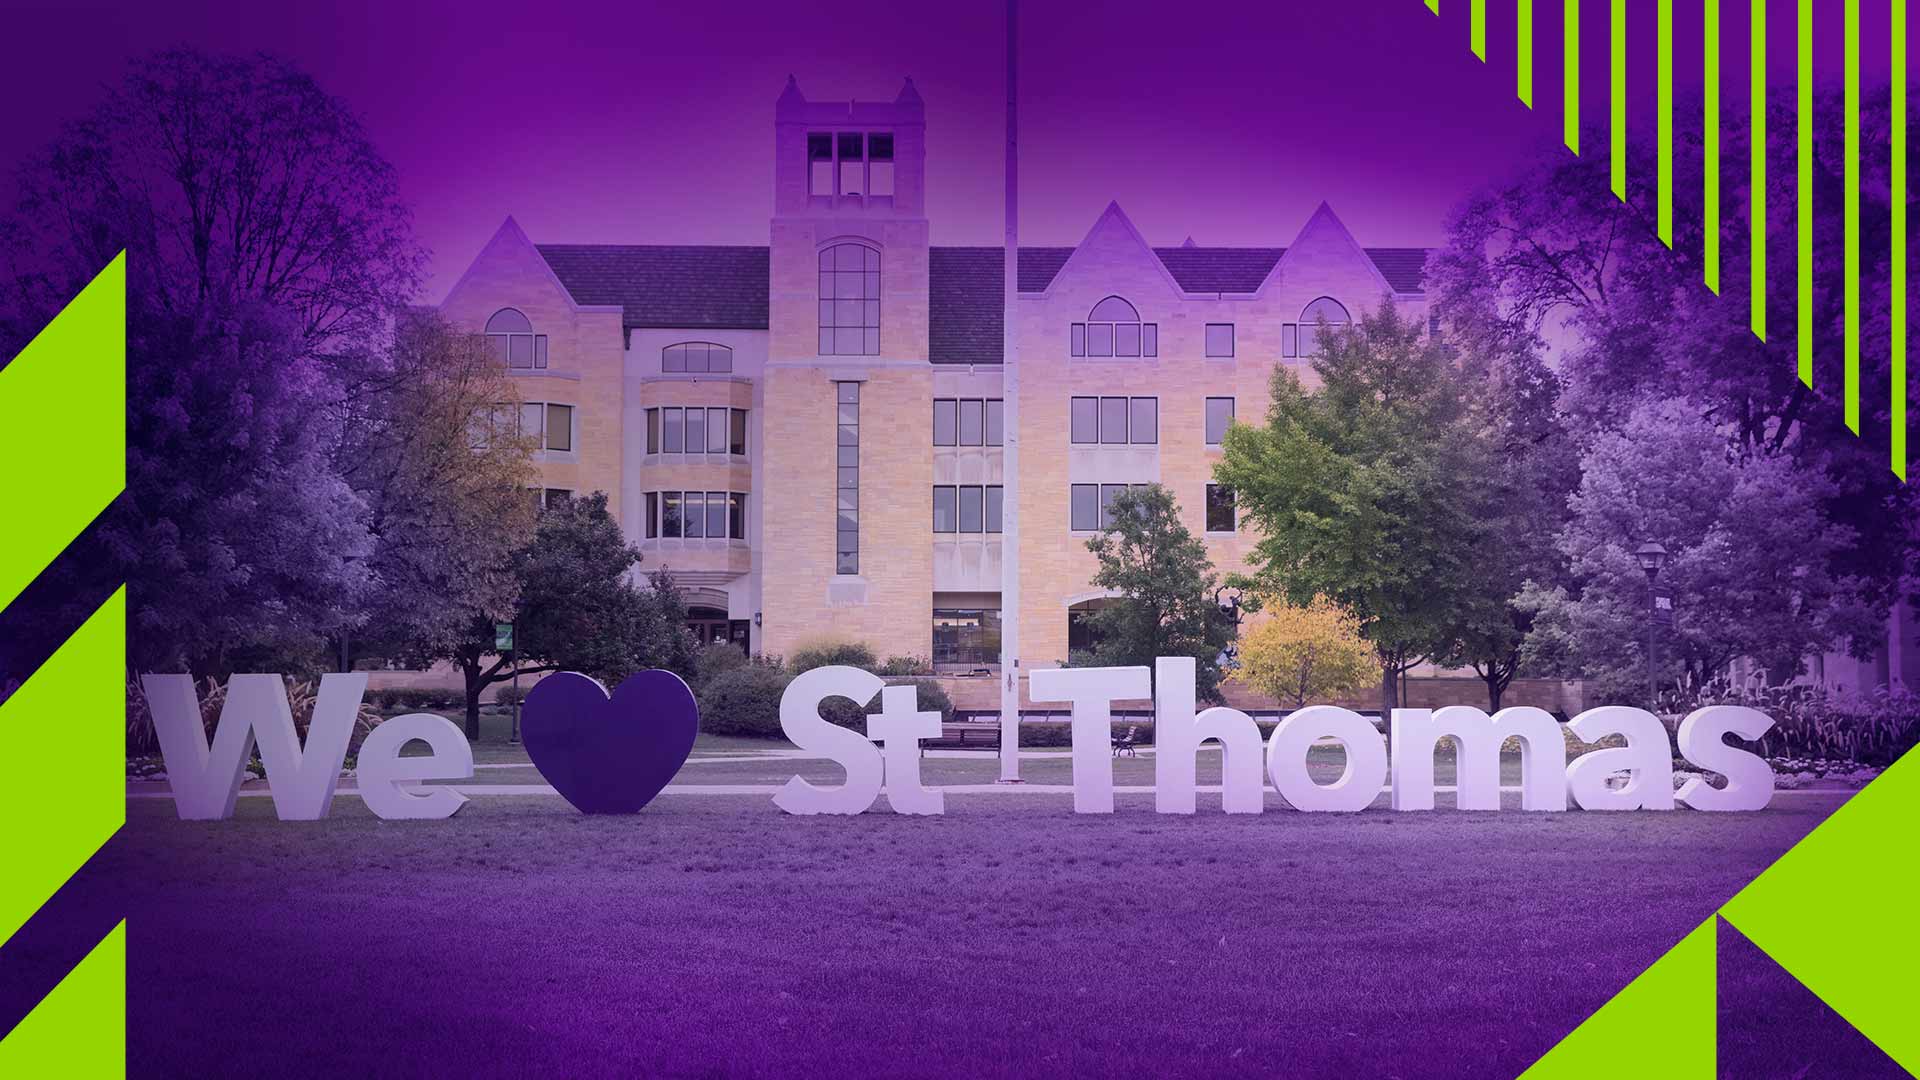 Large letters on the lower quad spell out We Love St. Thomas